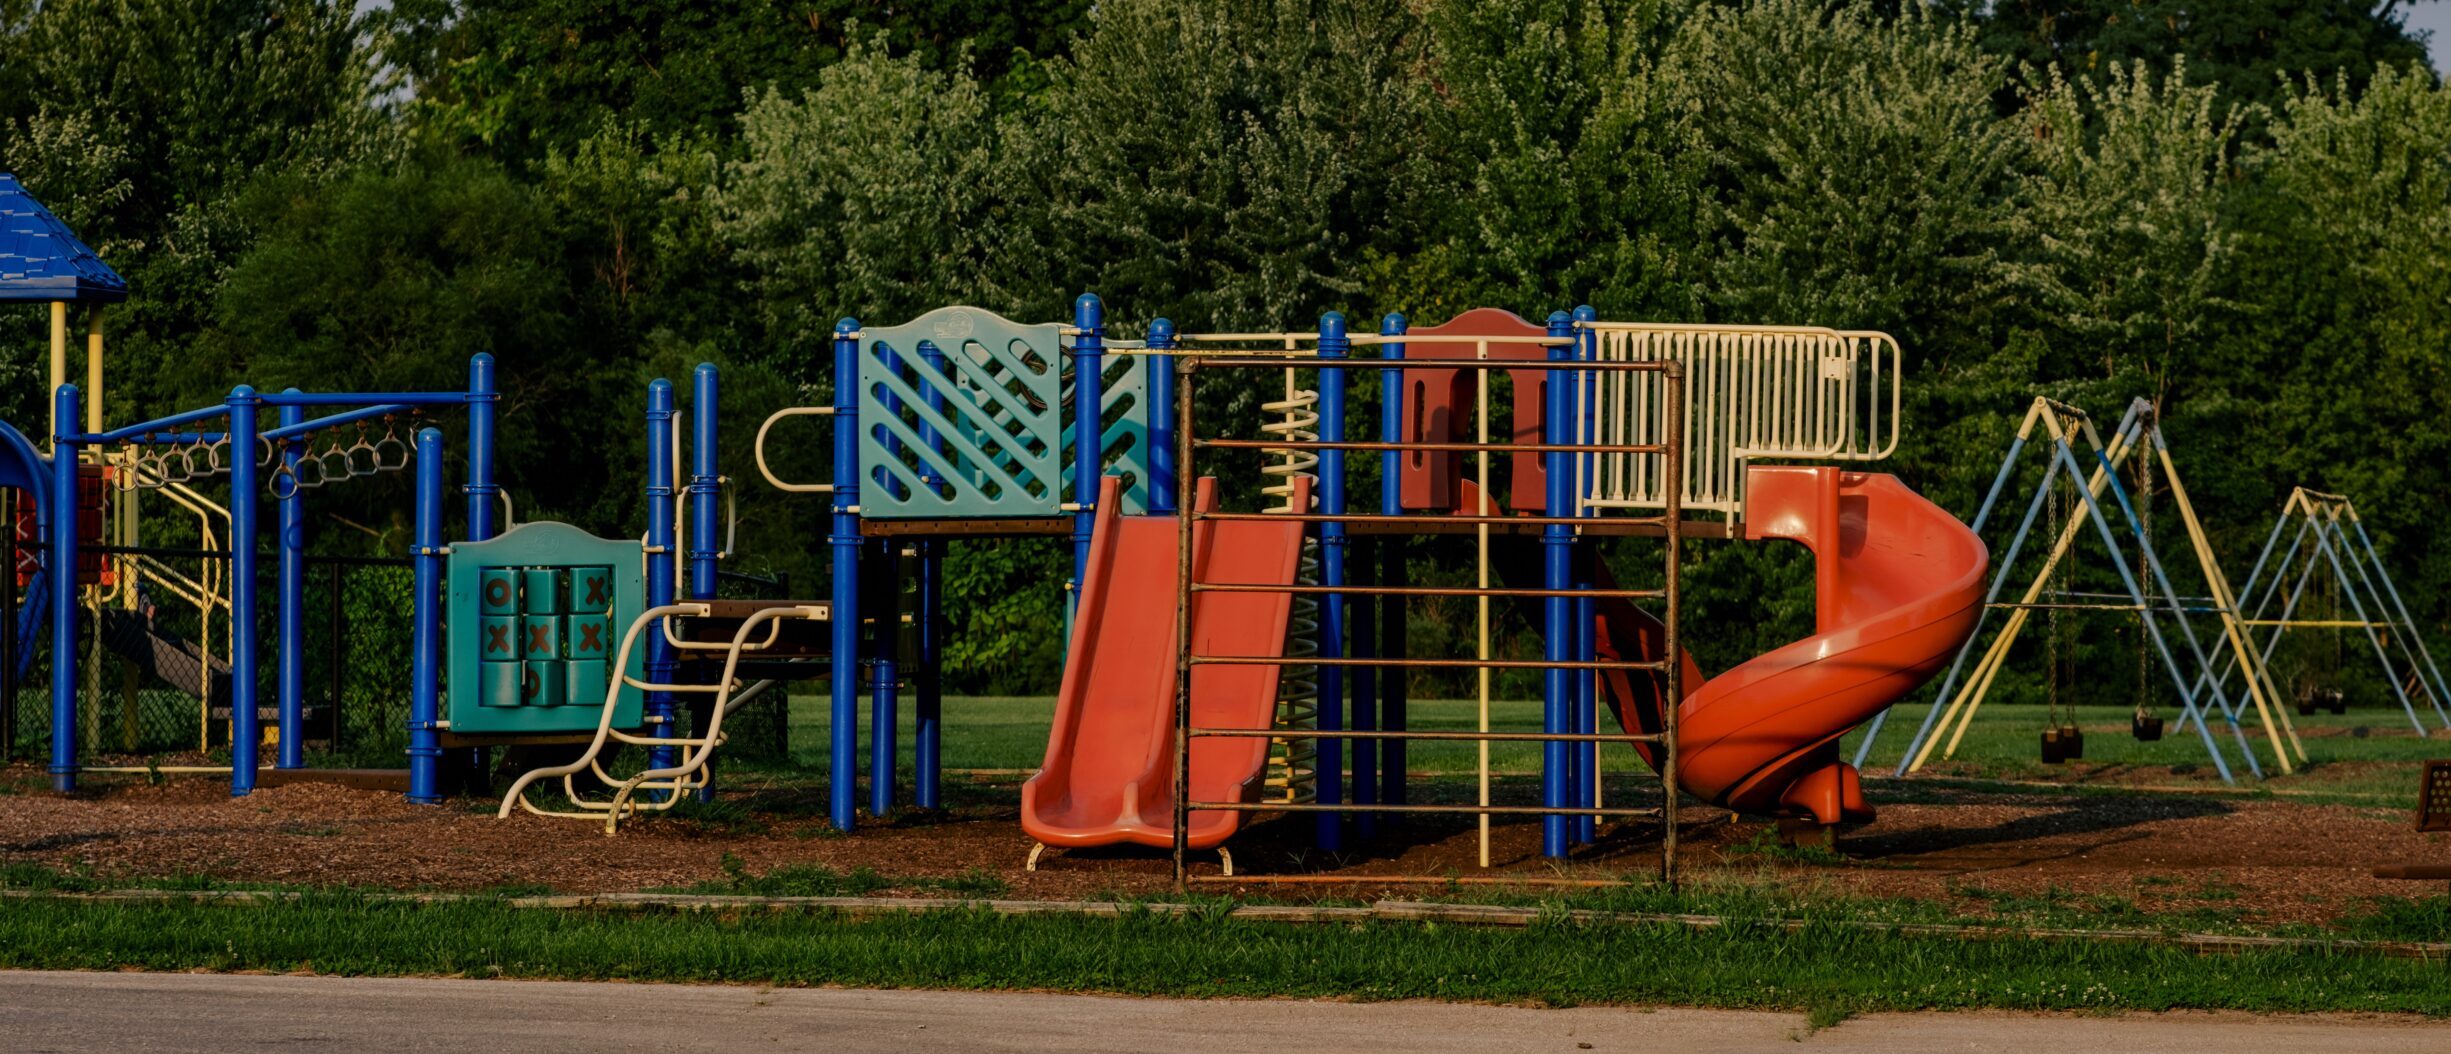 The playground at Faculty Park